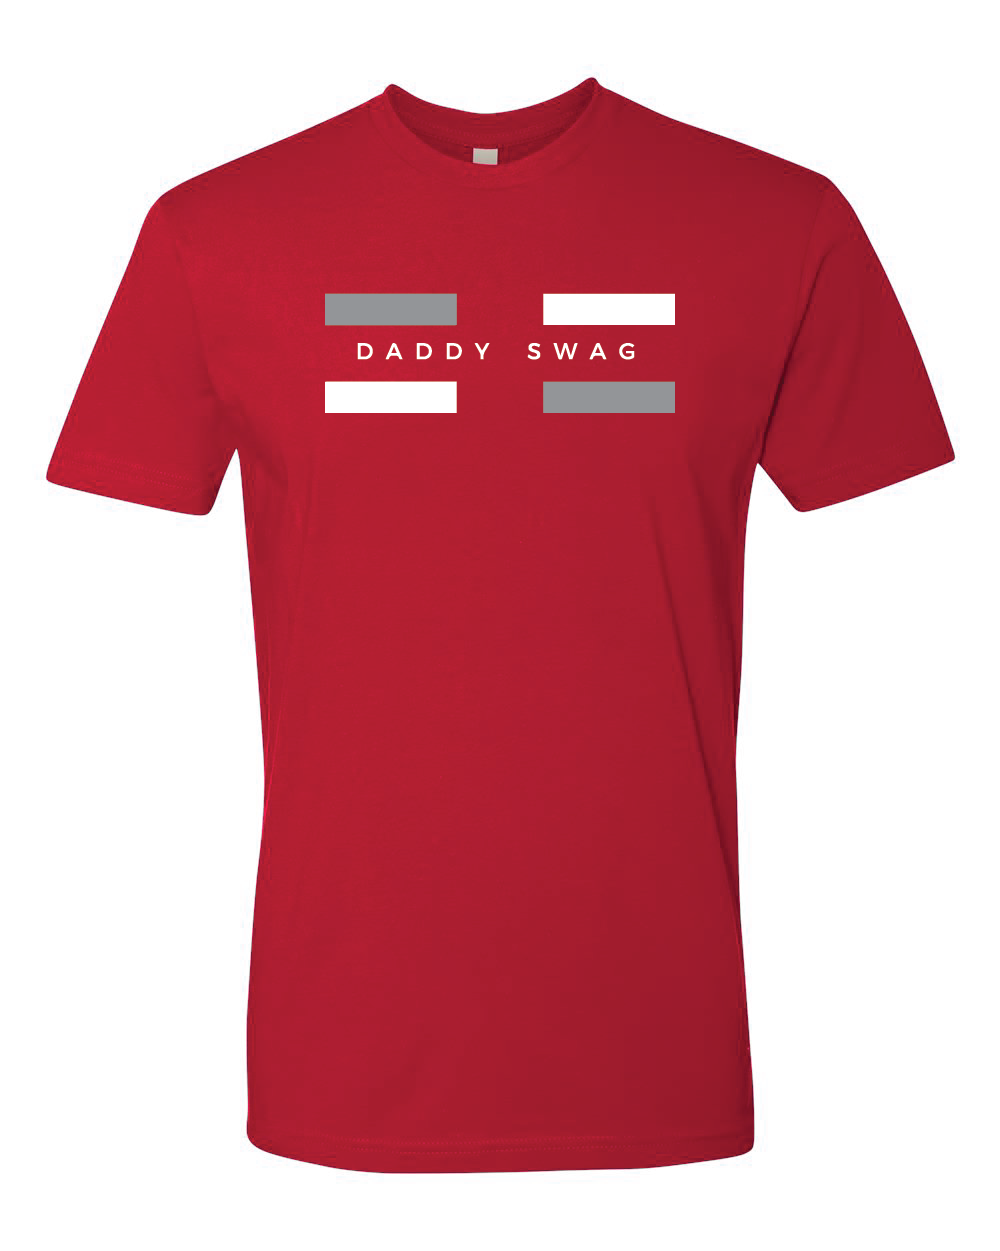 DADDY SWAG TIMELESS T-SHIRT - Daddy Swag Apparel 